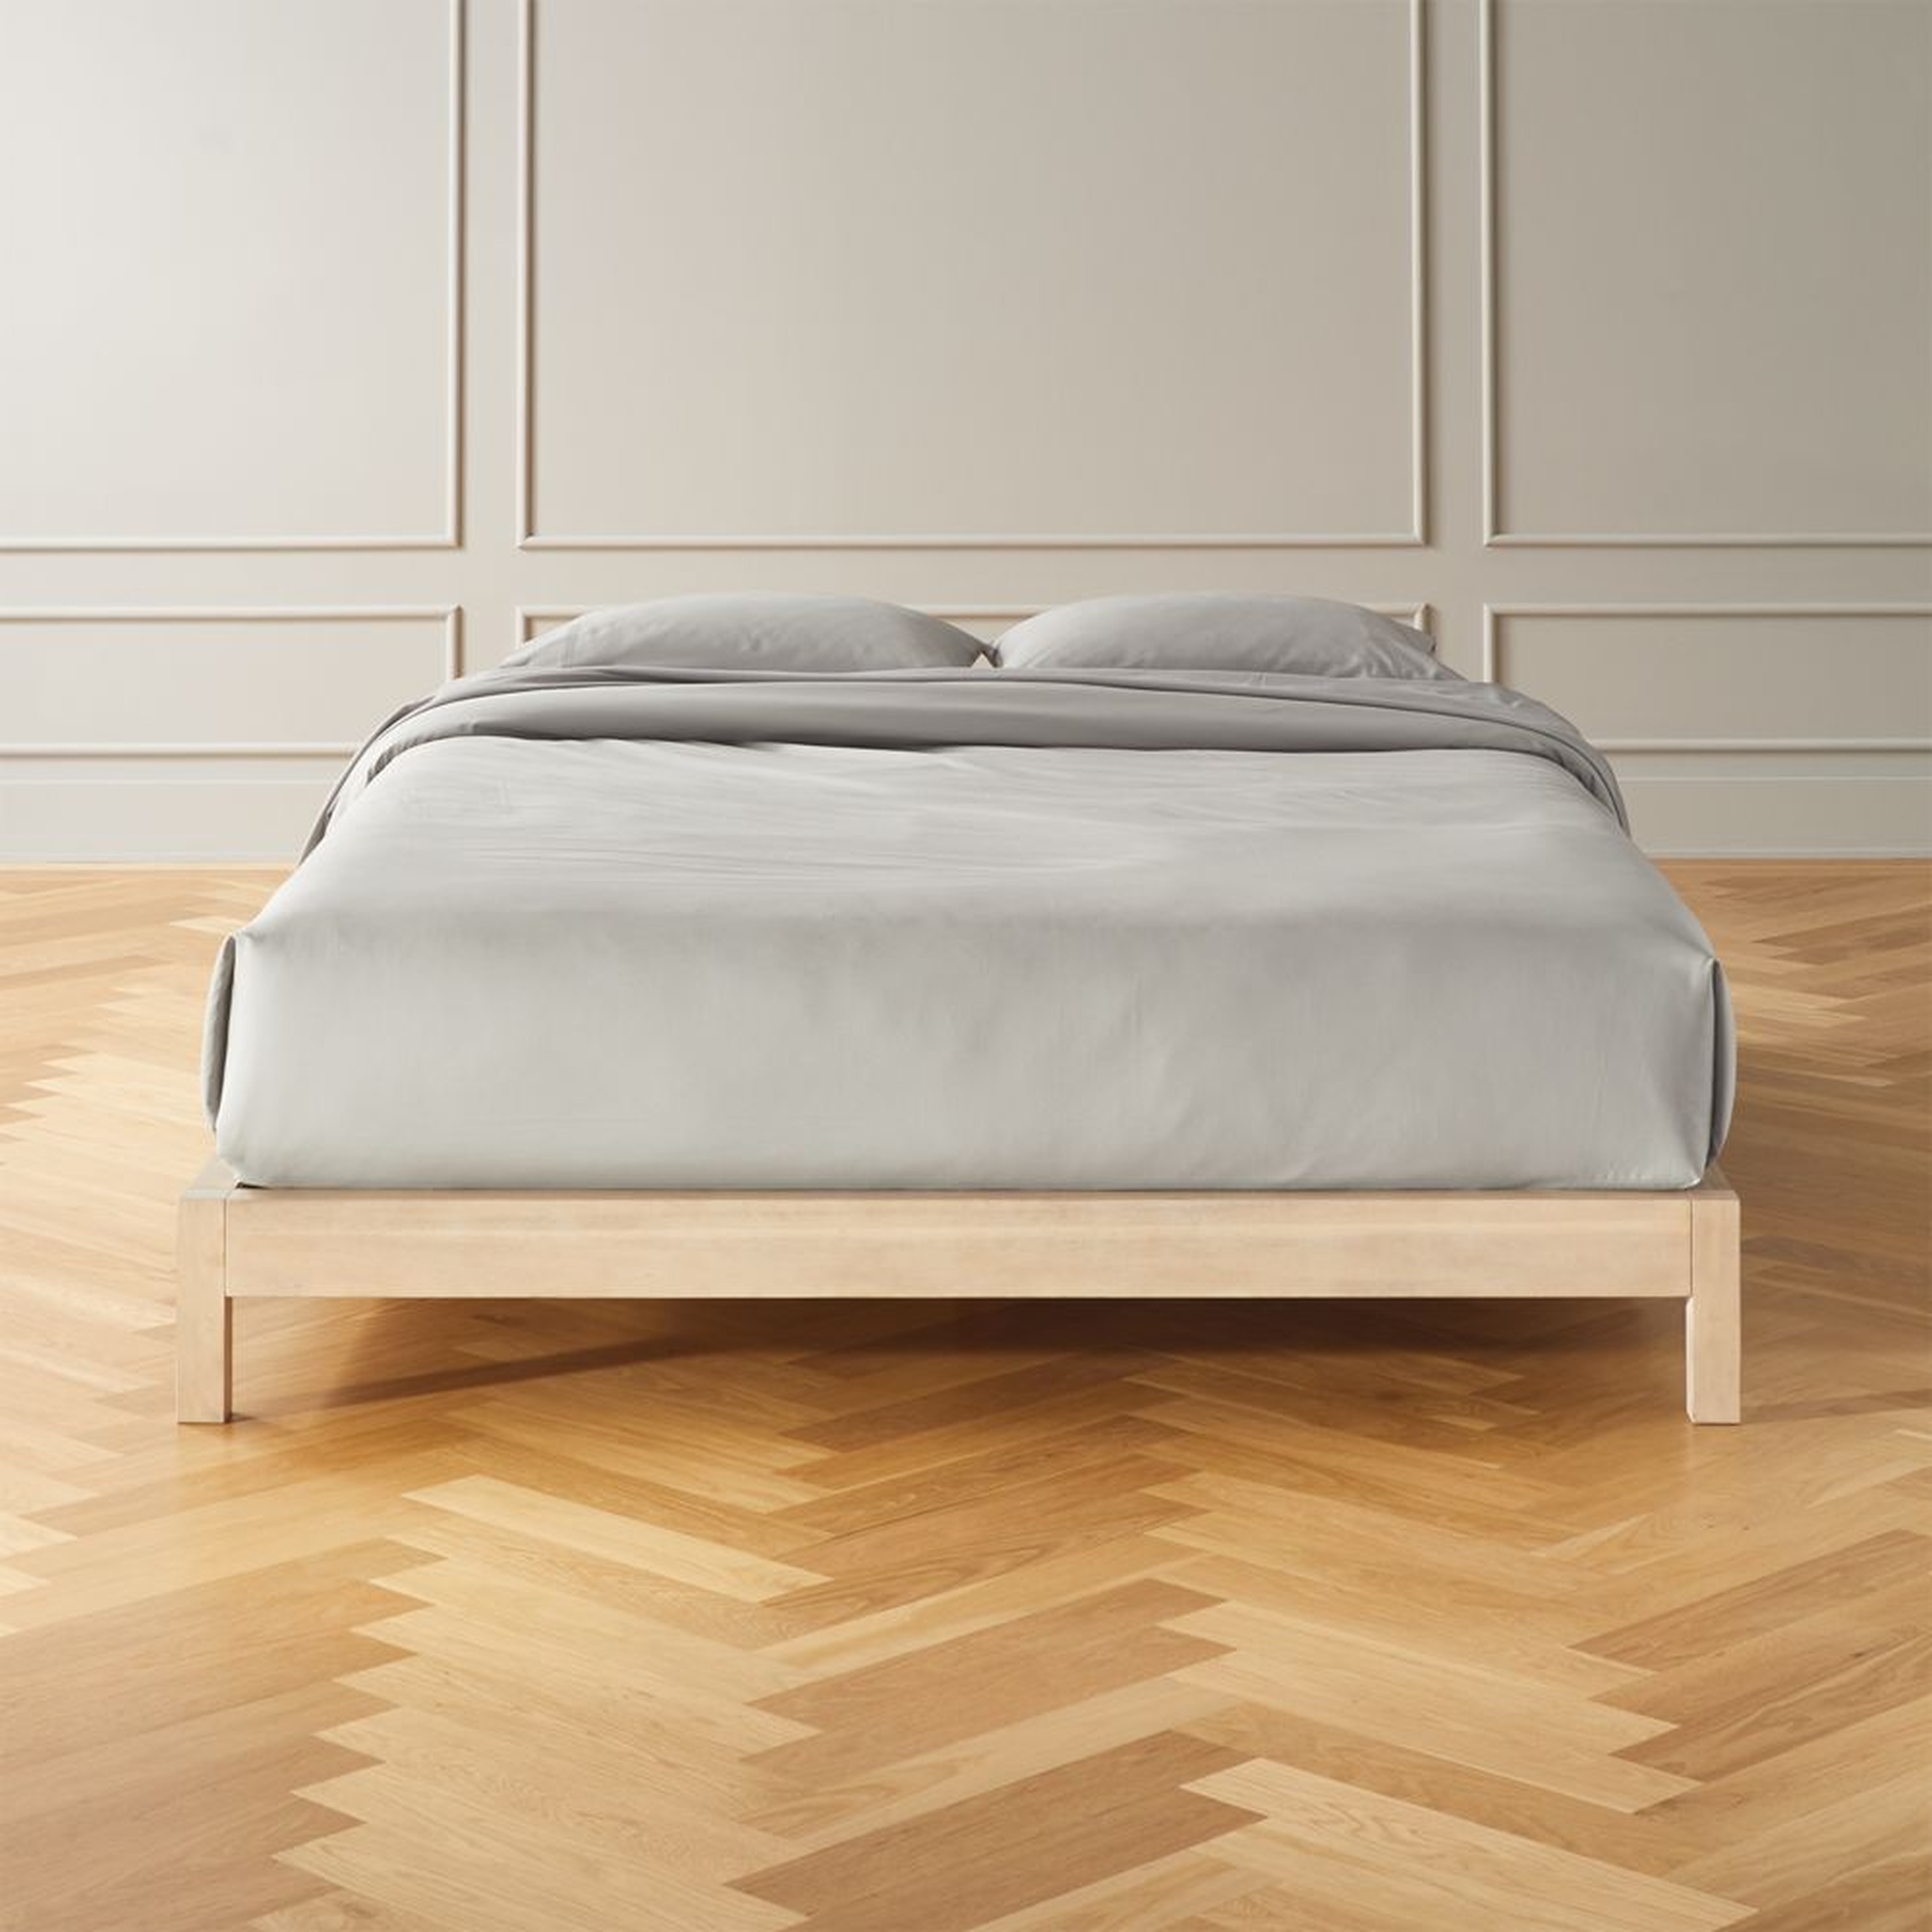 Simple Whitewash Bed Base Queen - CB2